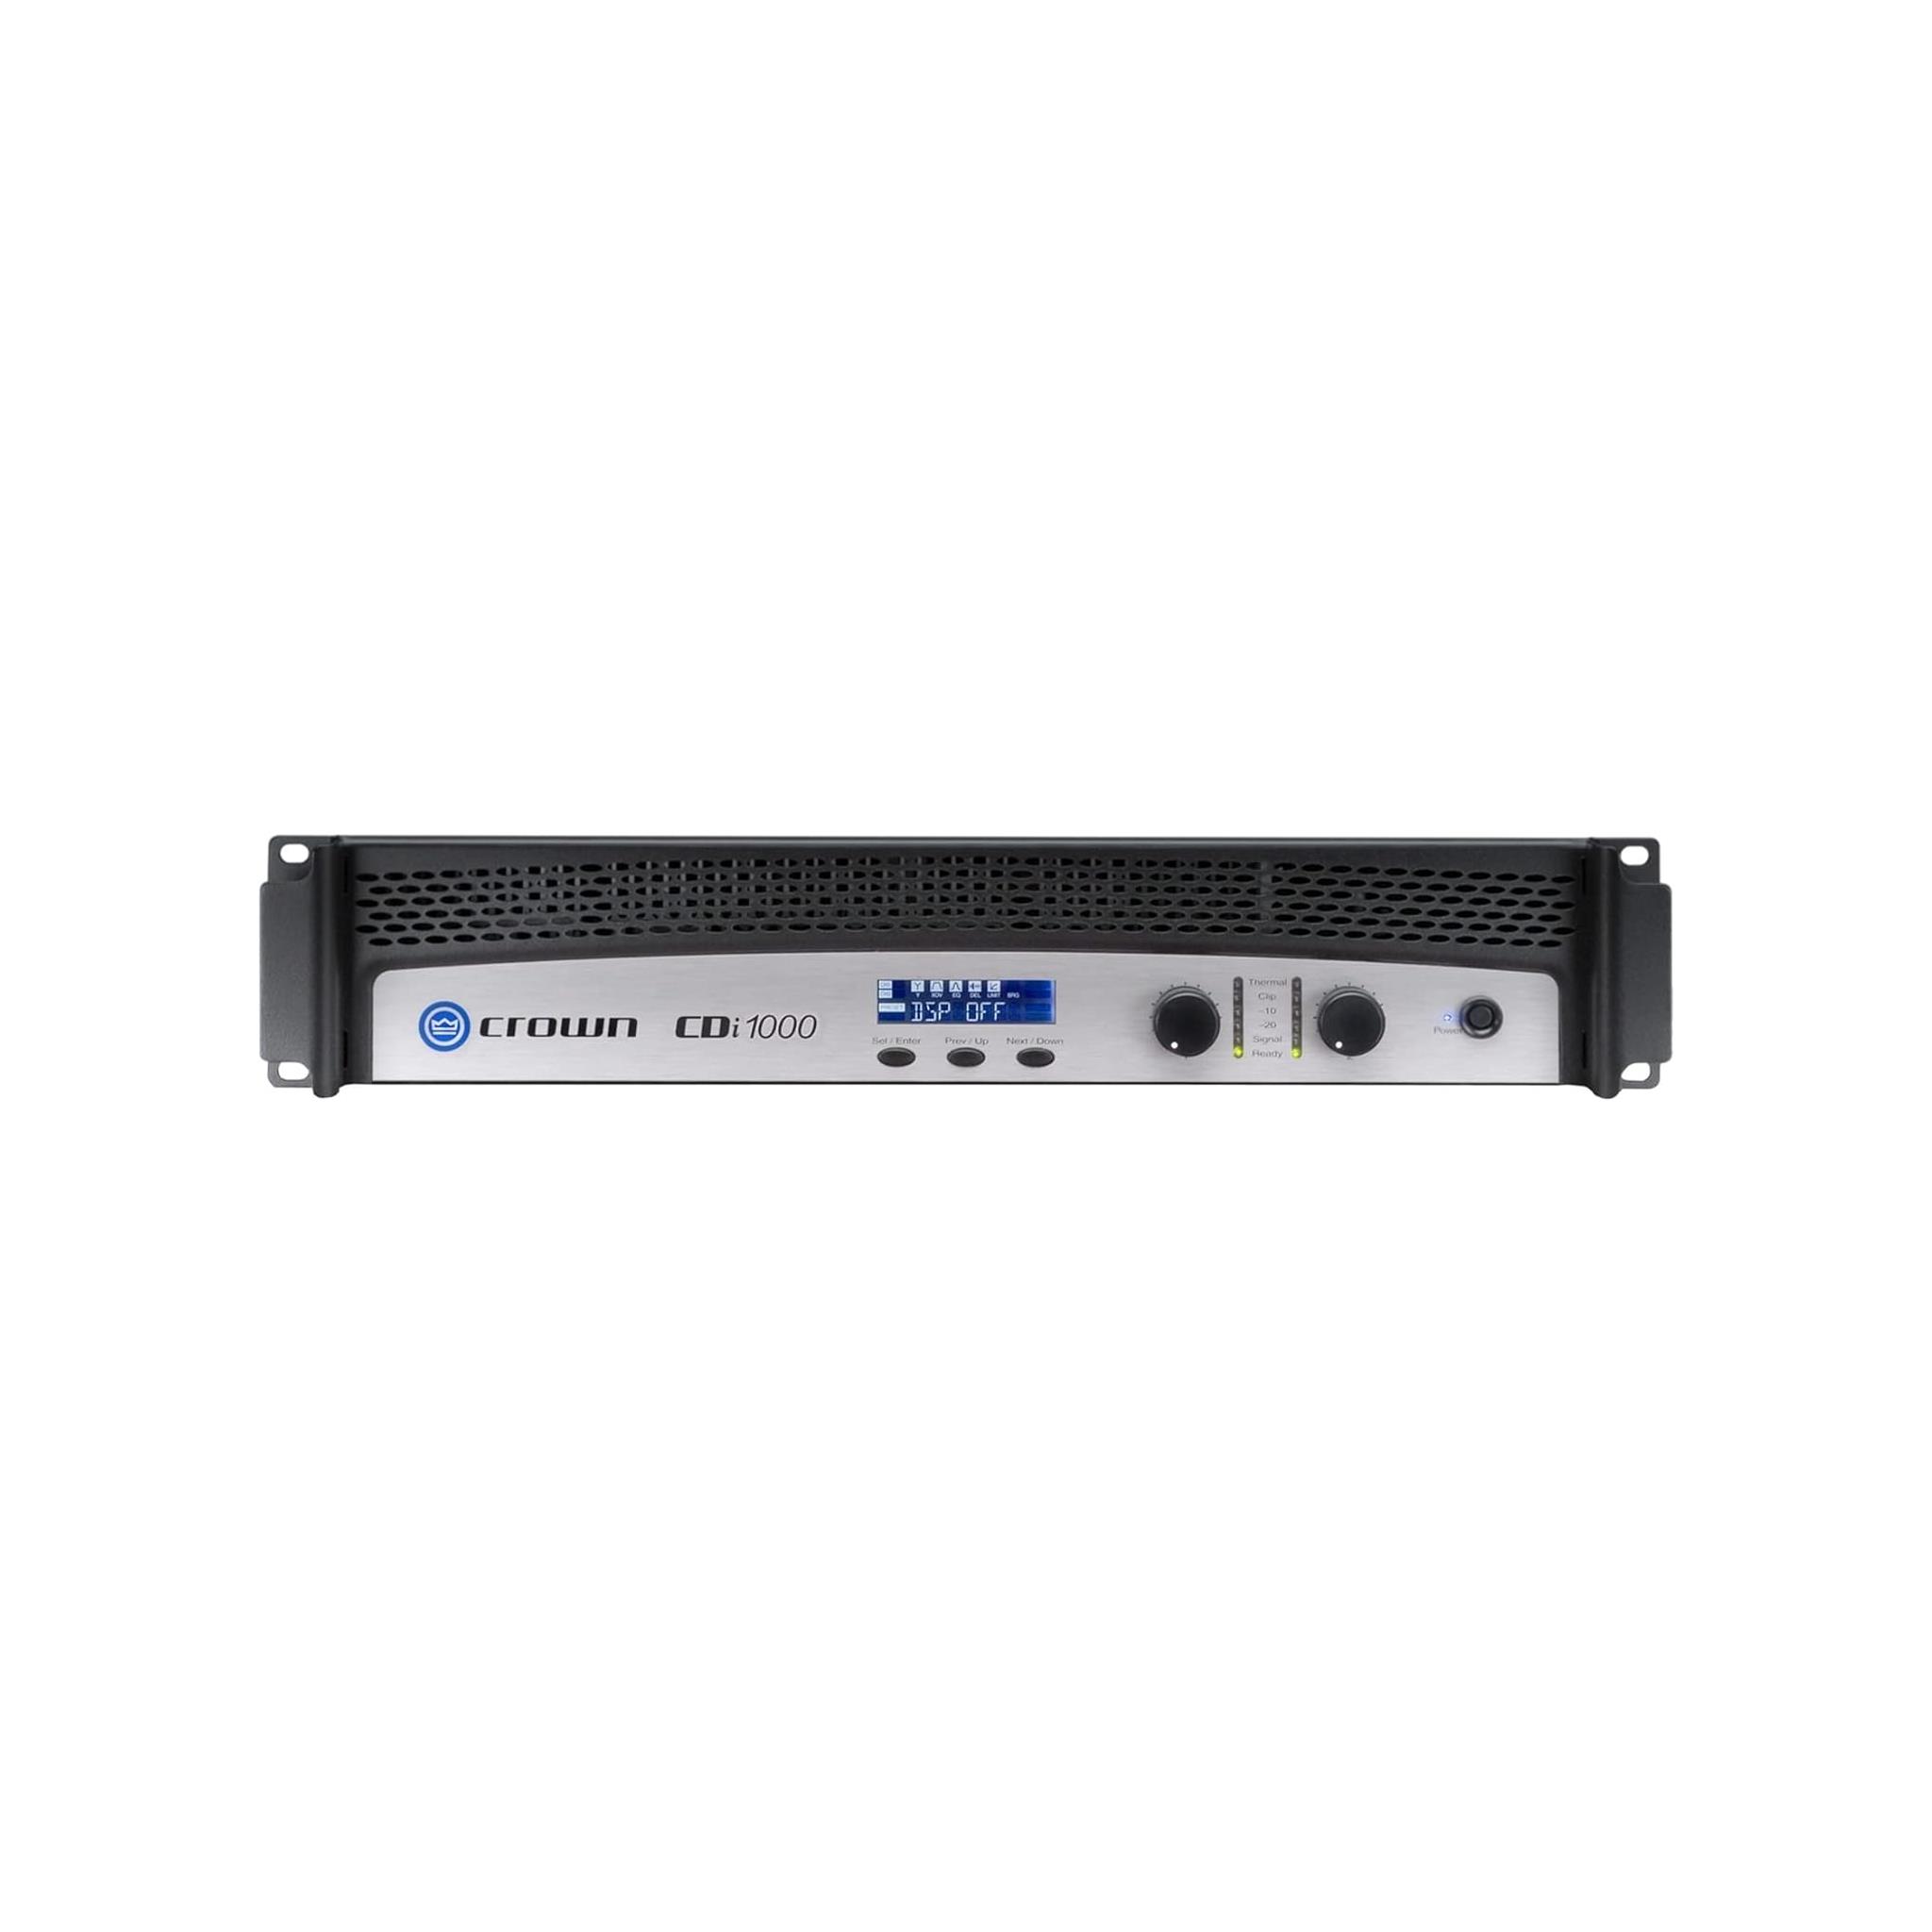 Crown dual channel commercial power amplifier with DSP